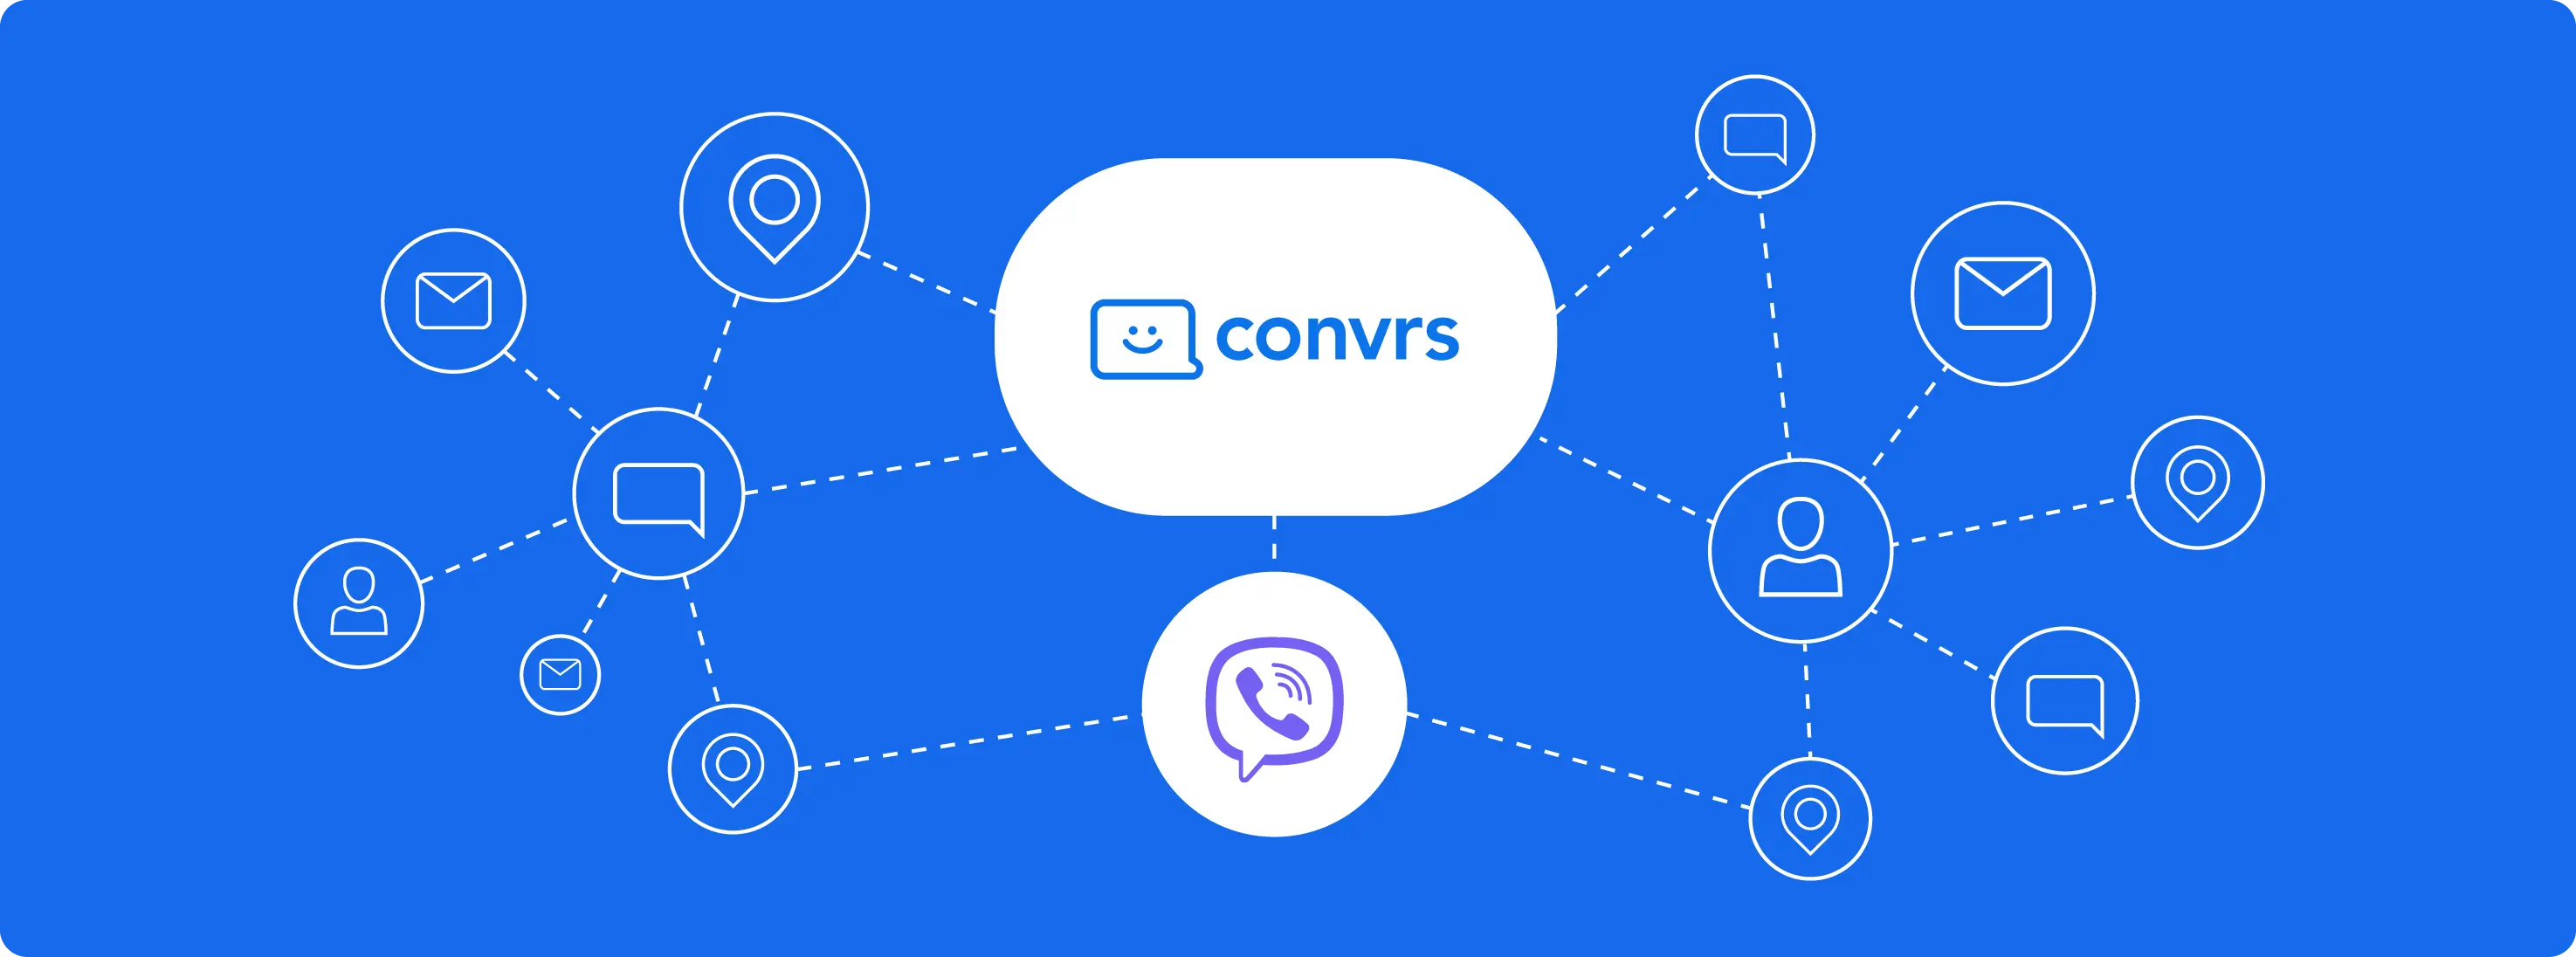 Viber, connecting people to business by messaging